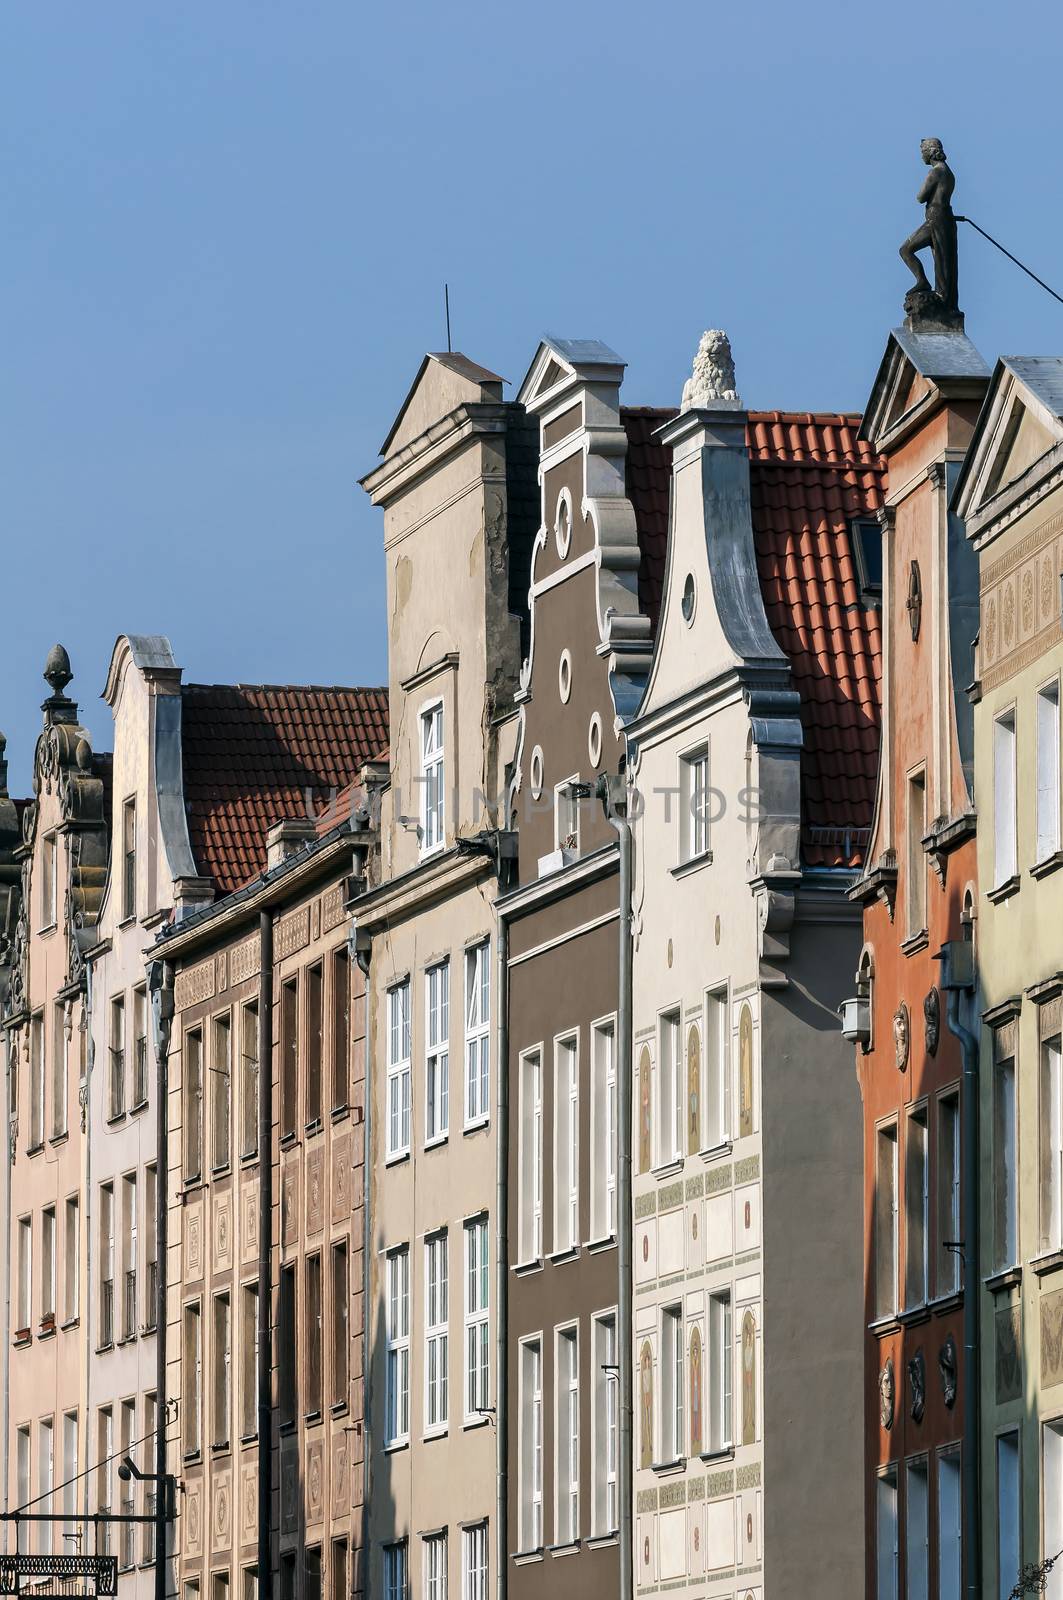 Typical polish architecture in the Old Town of Gdansk.